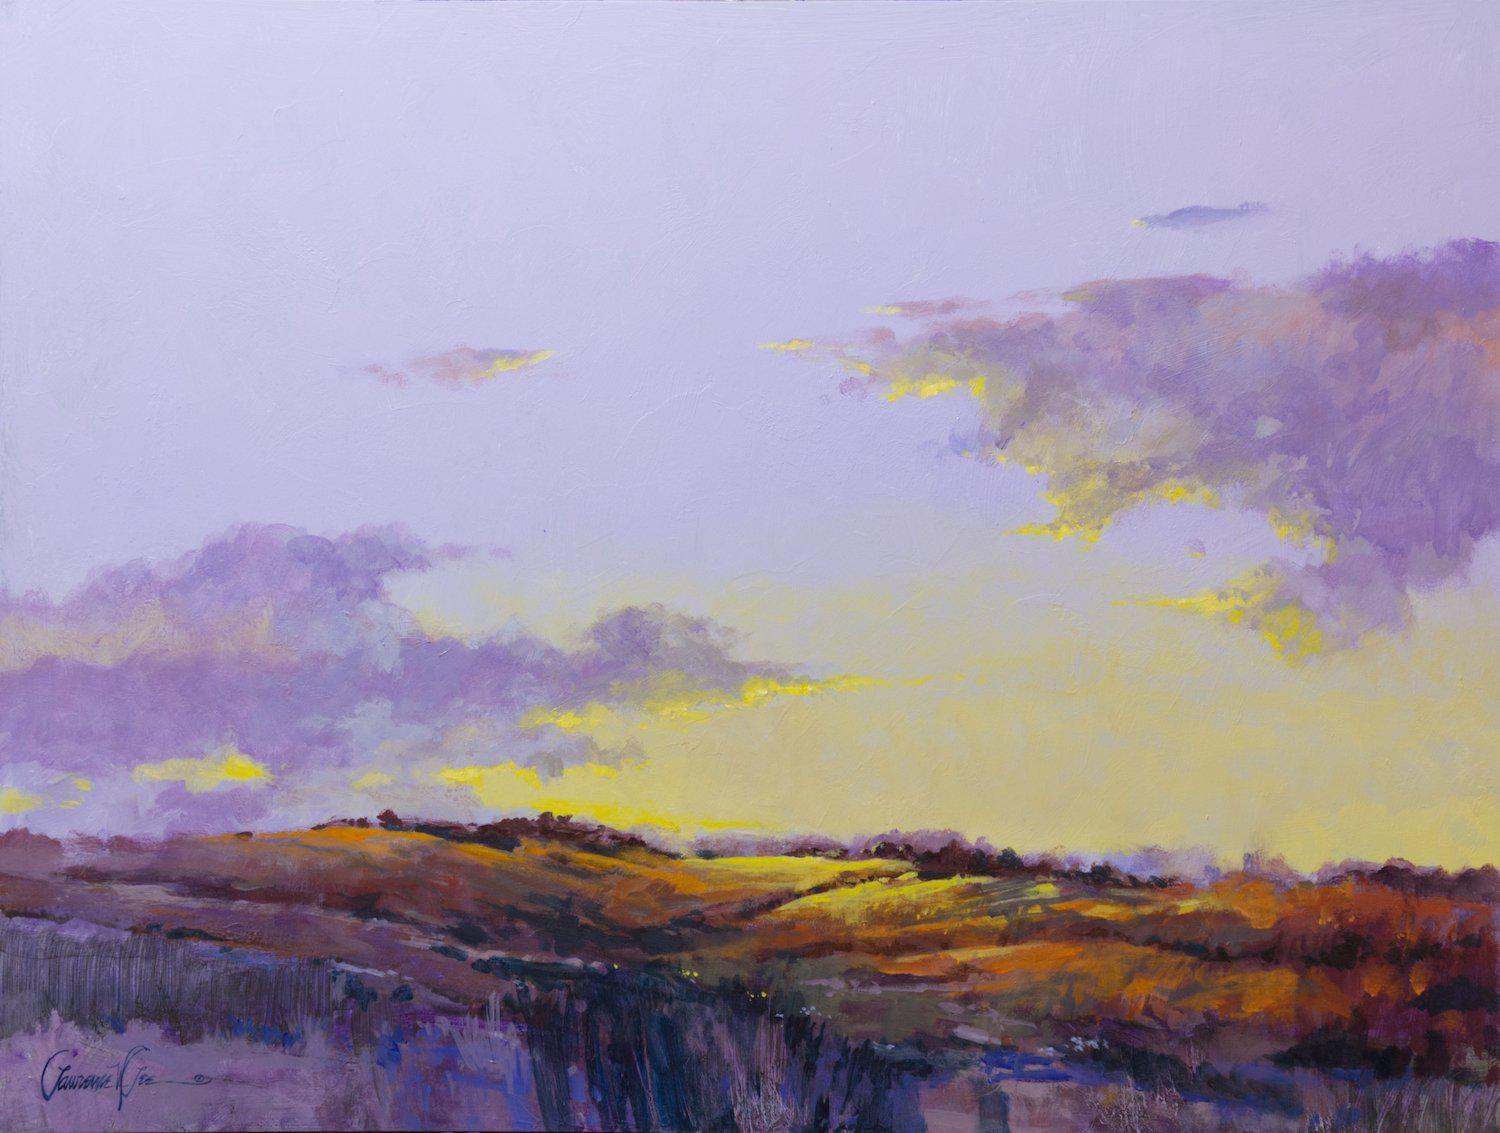 Sunset Hills-Painting-Lawrence Lee-Sorrel Sky Gallery